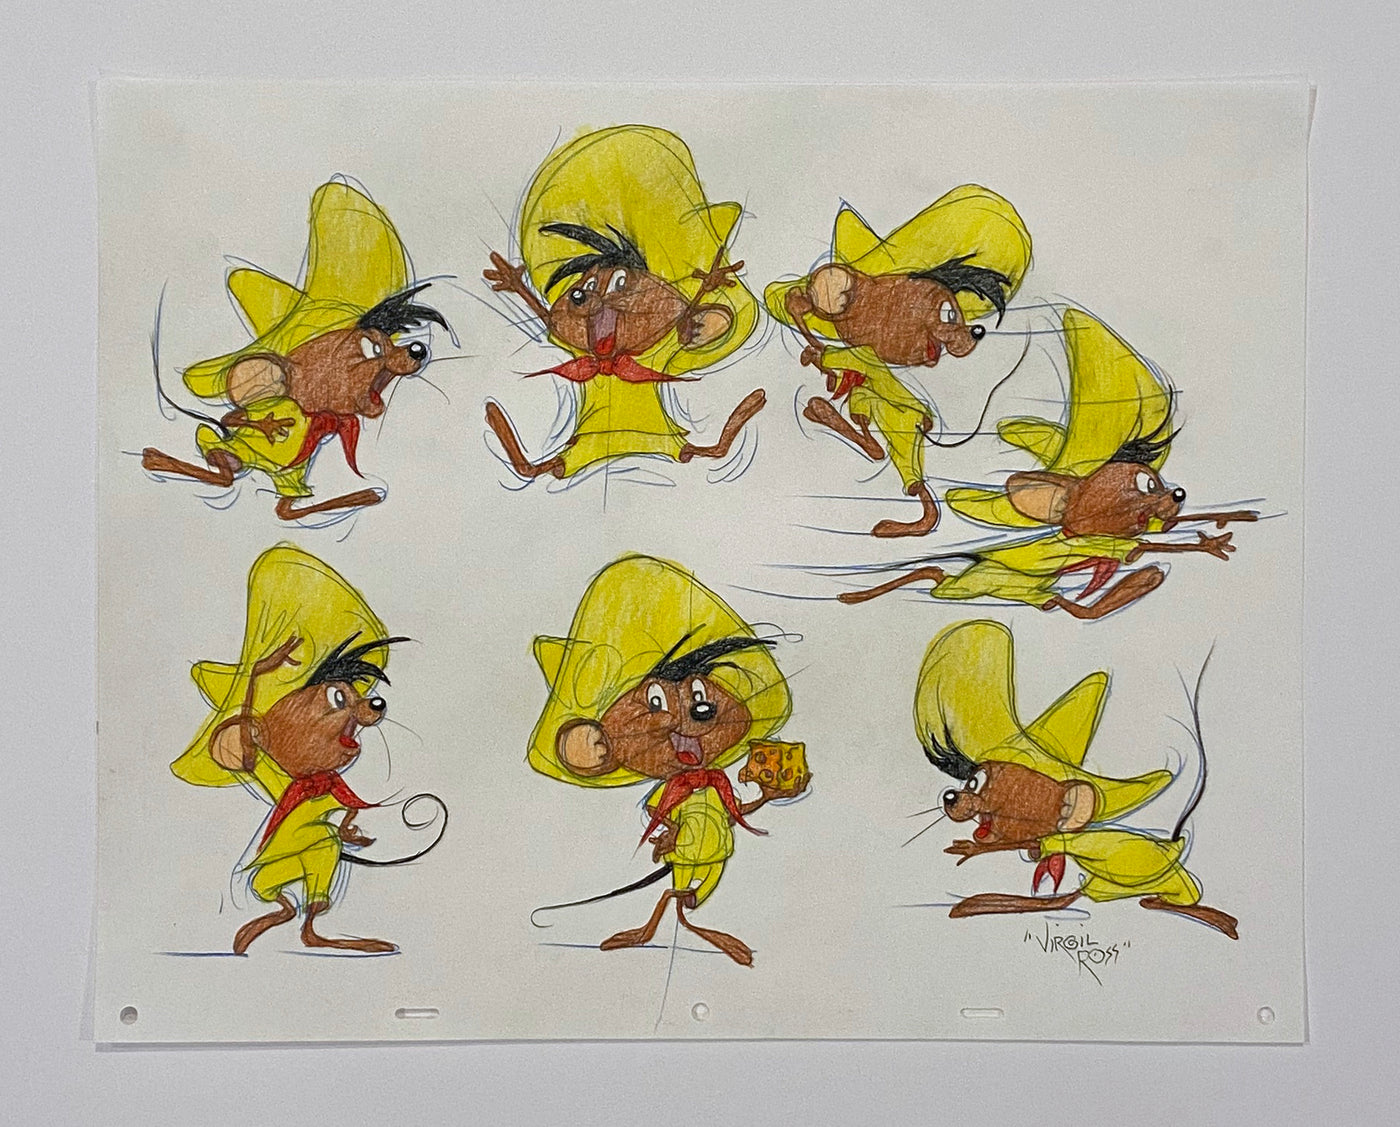 Speedy Gonzales is an animated cartoon character in the Warner